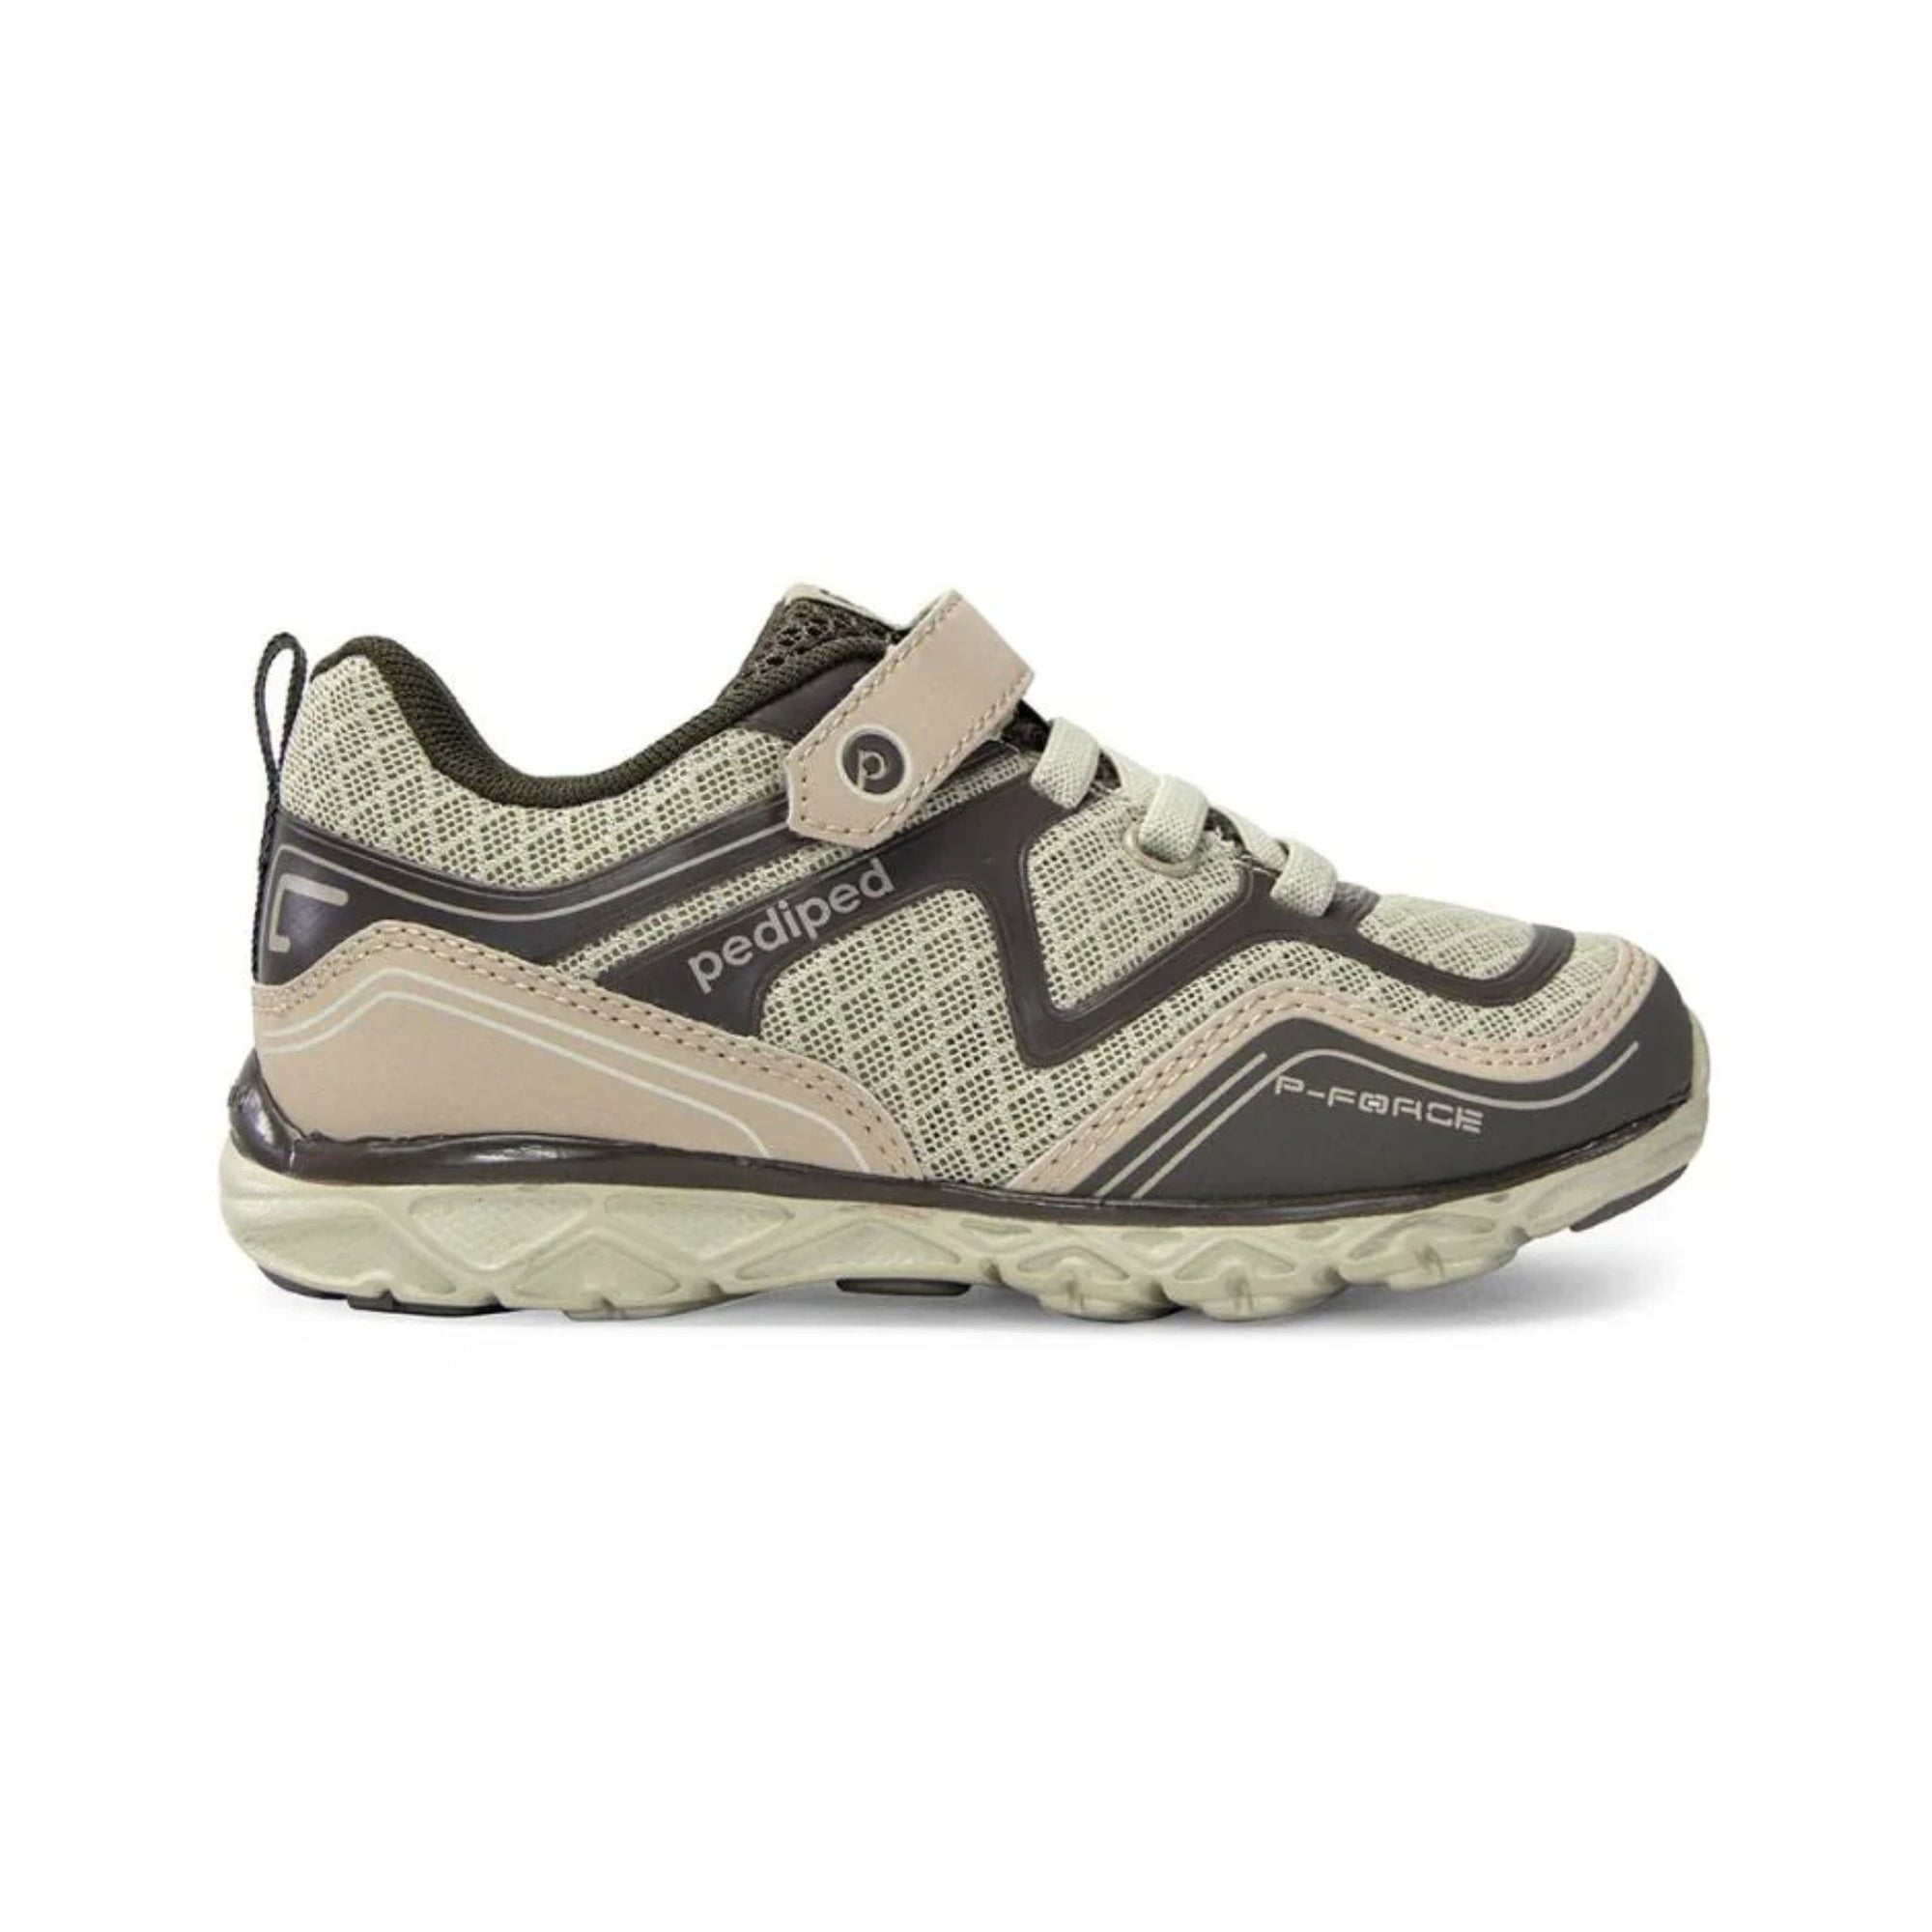 Pediped Flex Force Oyster Athletic Shoes